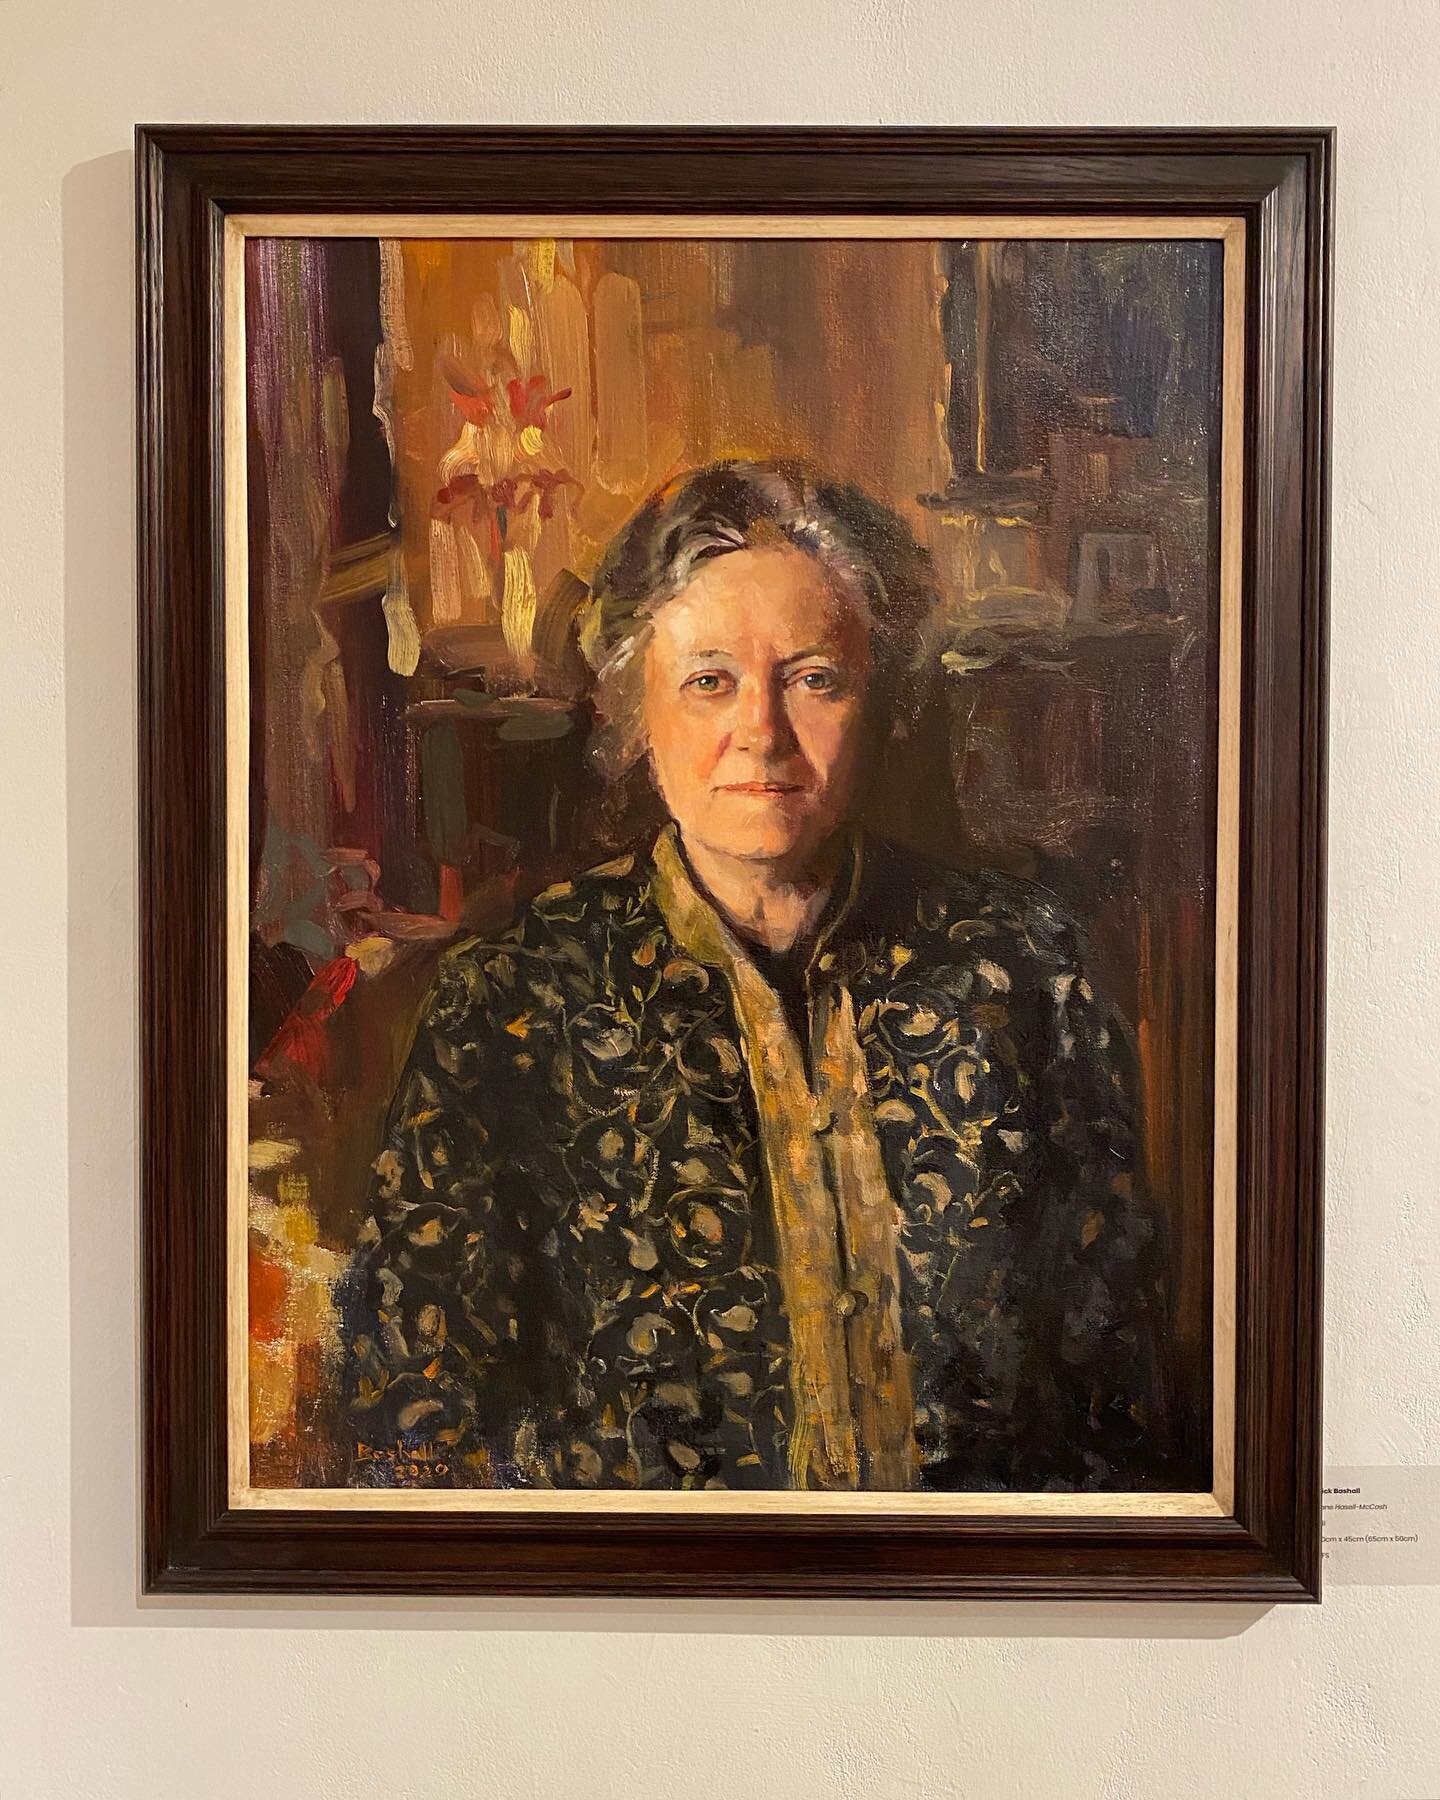 Now on show as part of the @royalsocietyportraitpainters exhibition at the Mall Galleries in London
.
.
.
#oiloncanvas #oilpainting #contemporarypainting #nickbashall